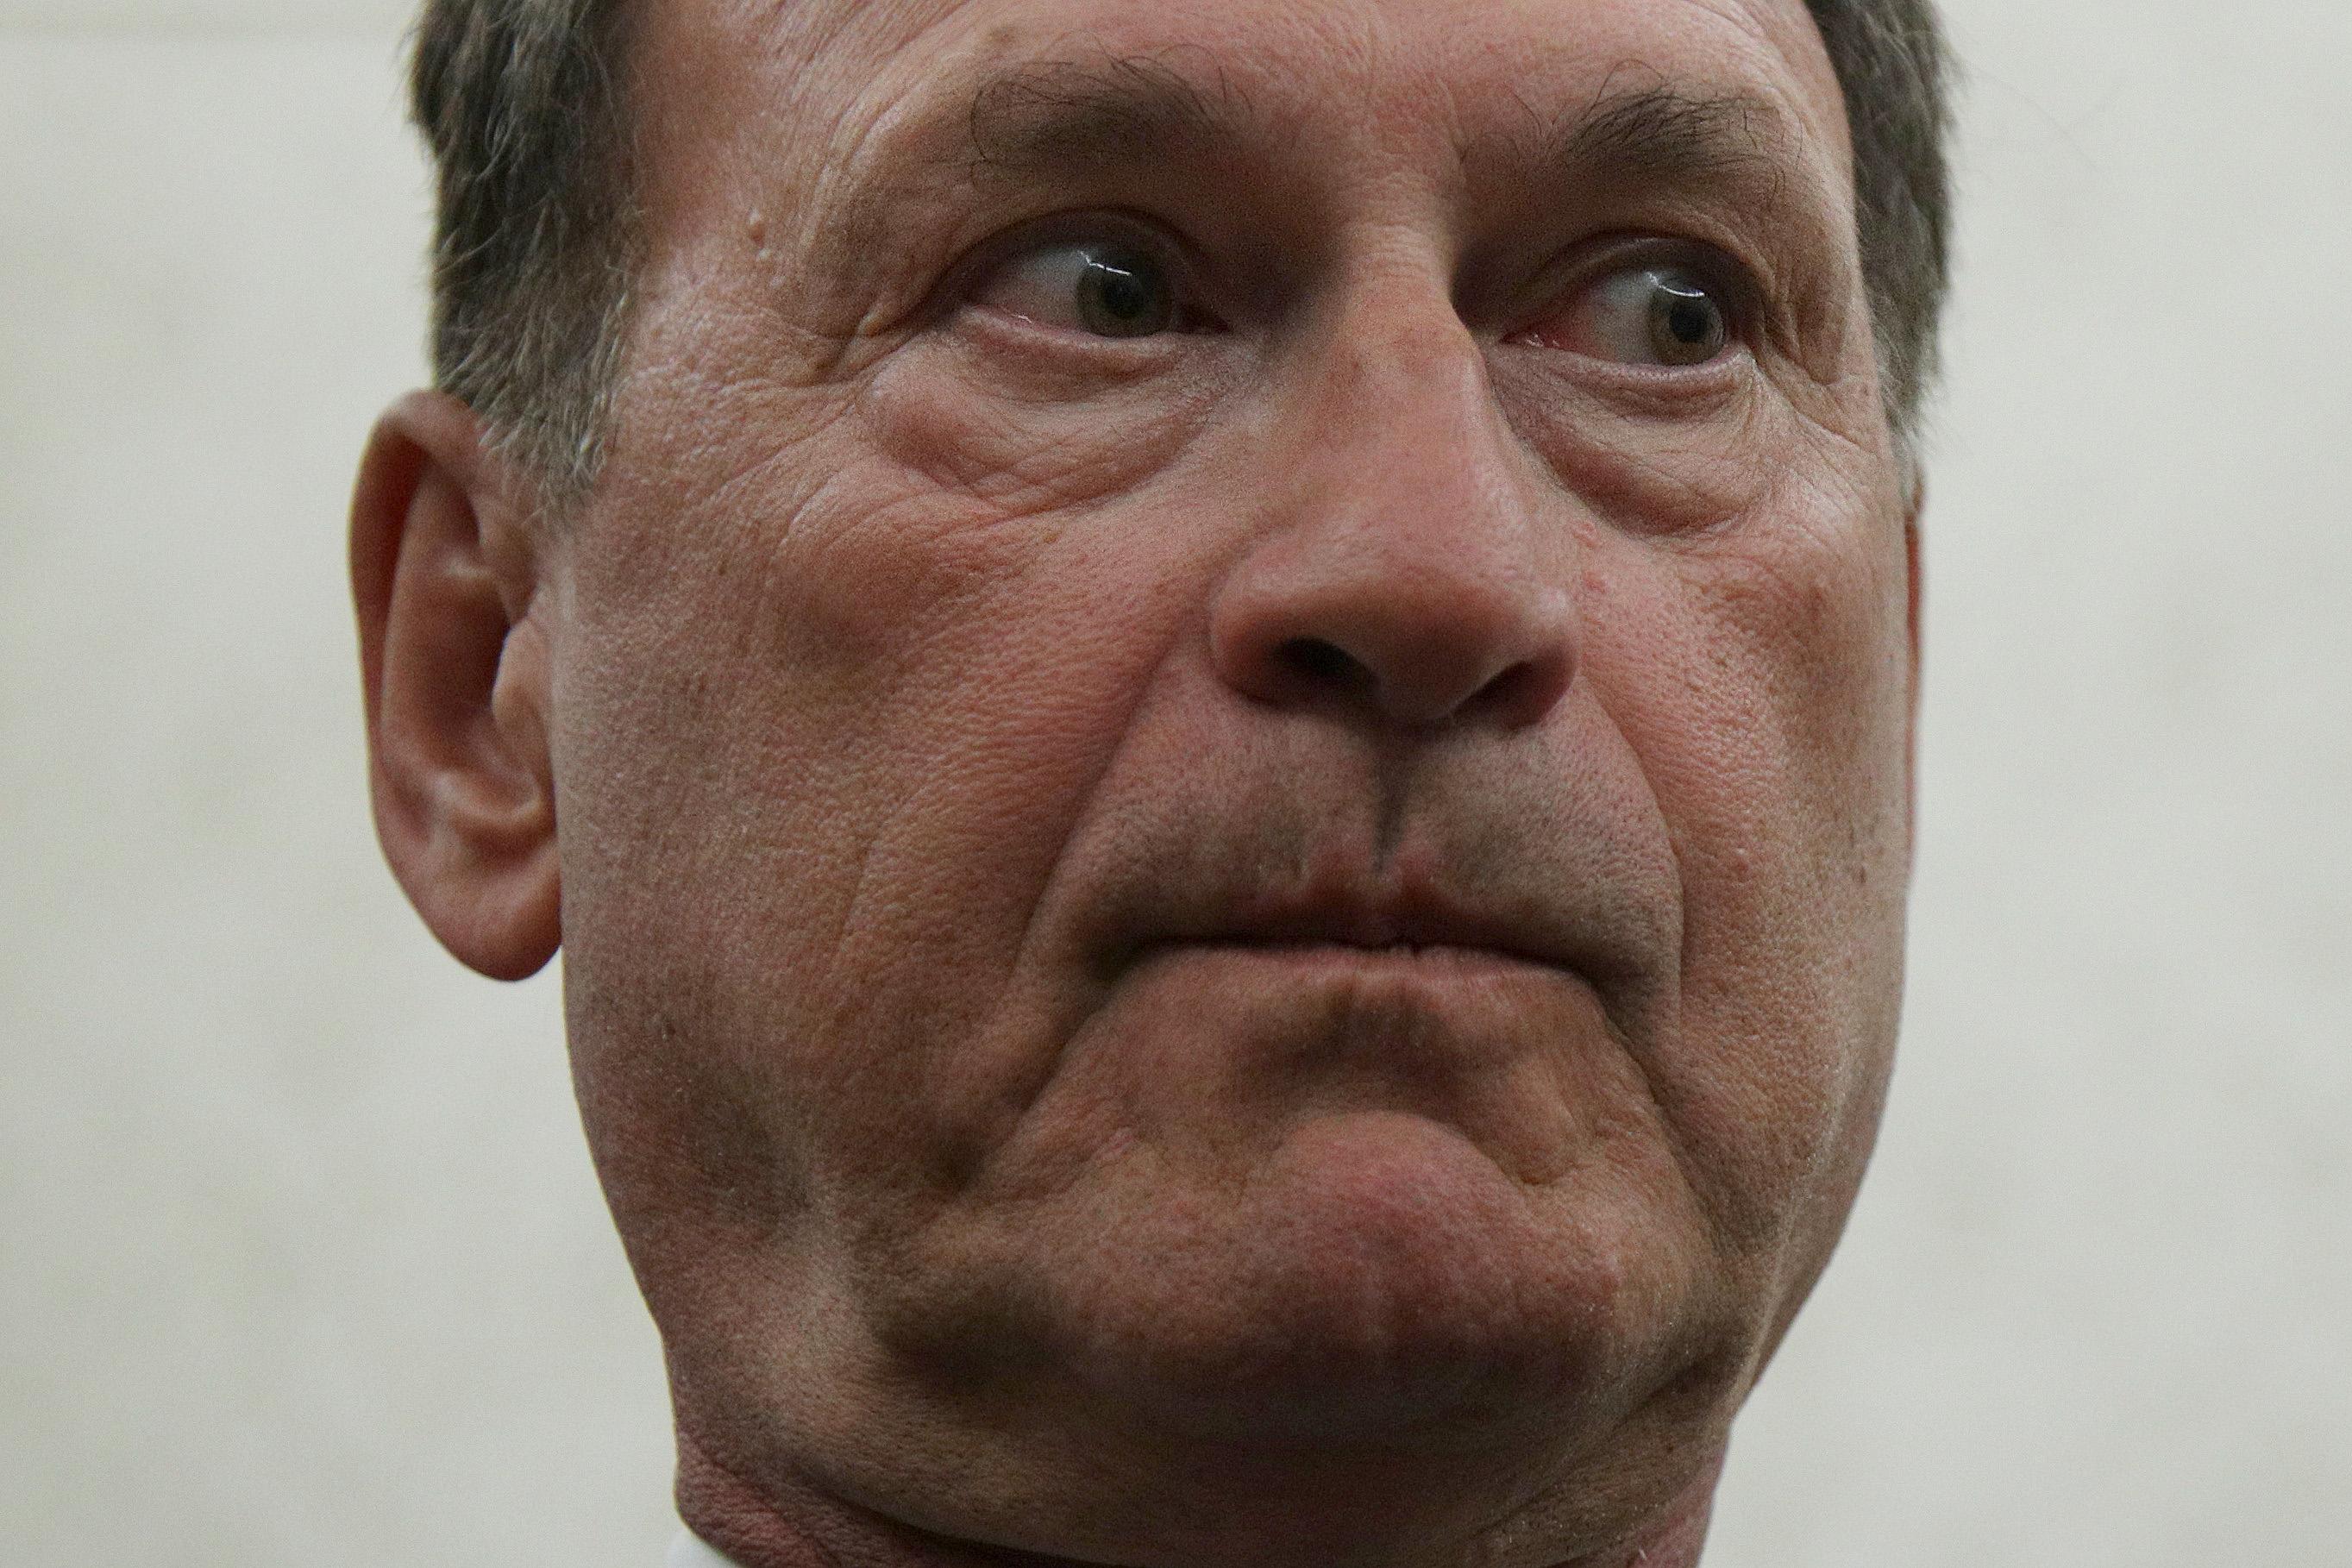 Samuel Alito Inadvertently Made the Best Case for Supreme Court Ethics Reform Steven Lubet